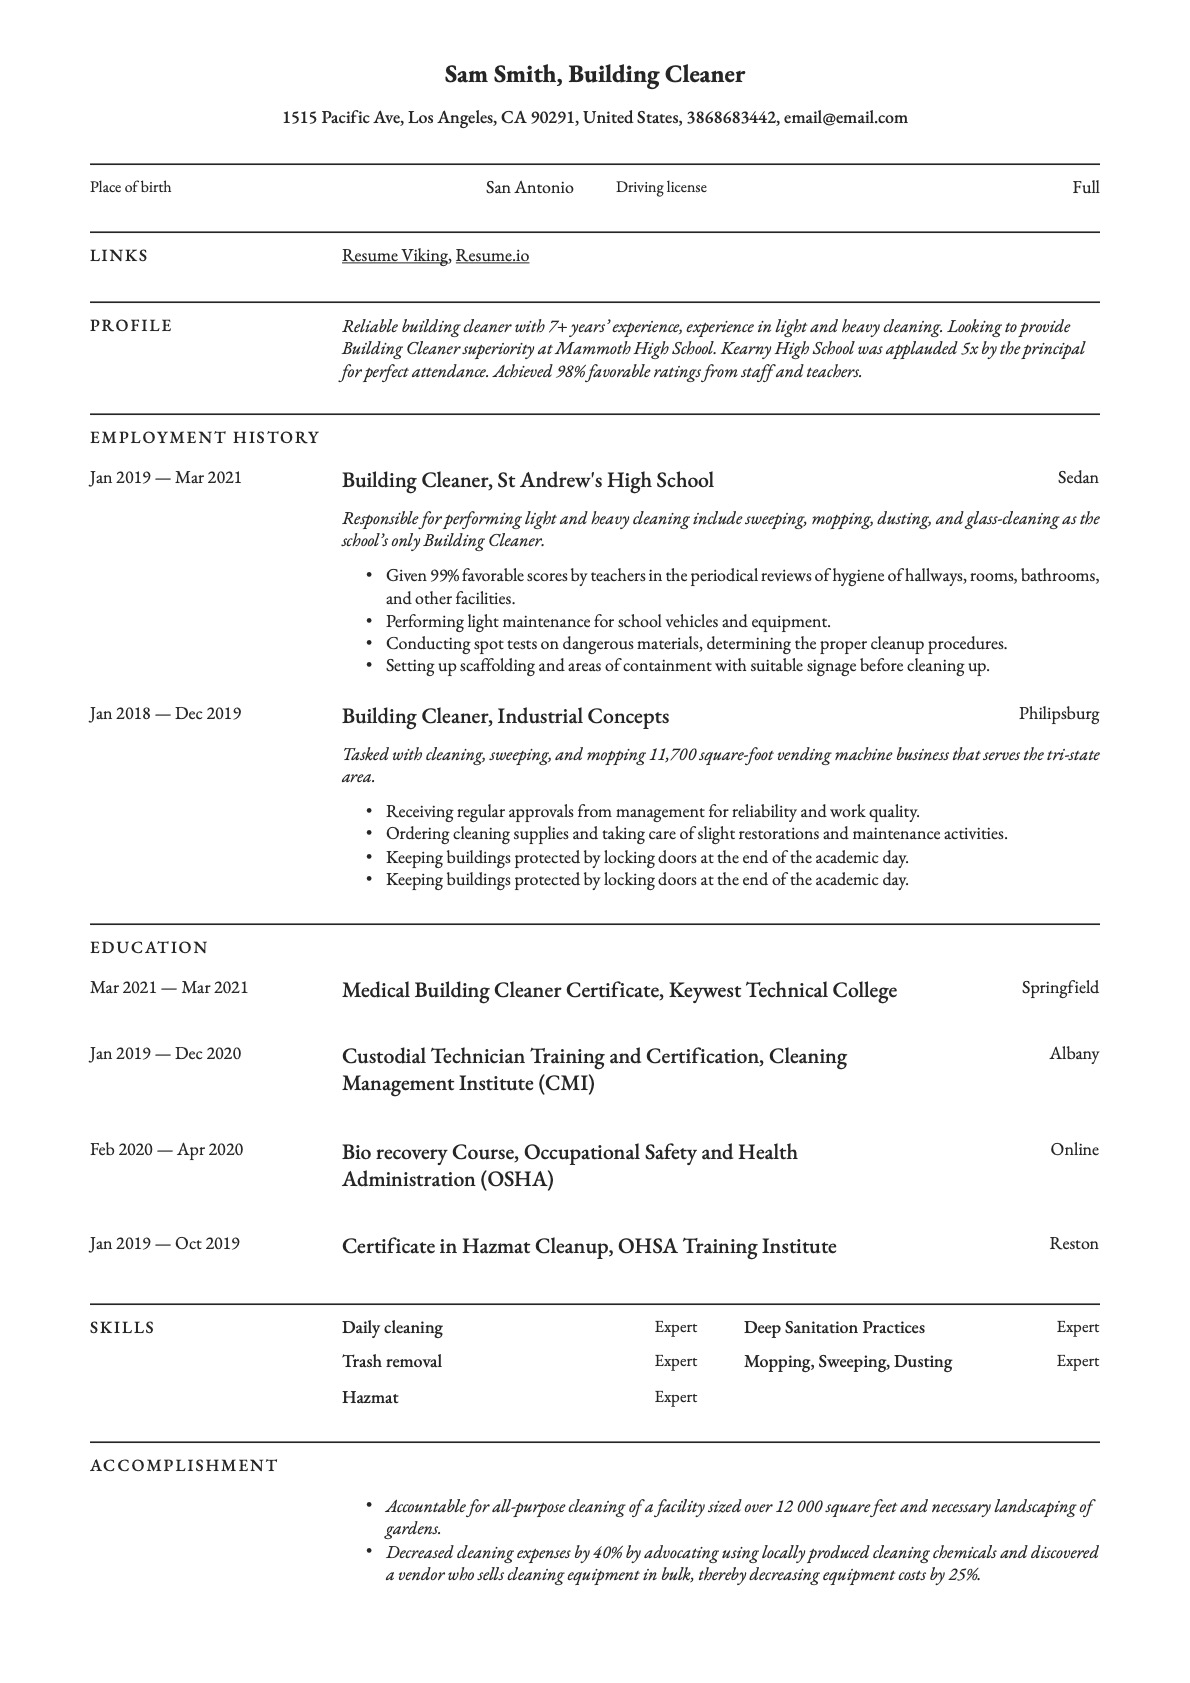 Example Resume Building Cleaner-5